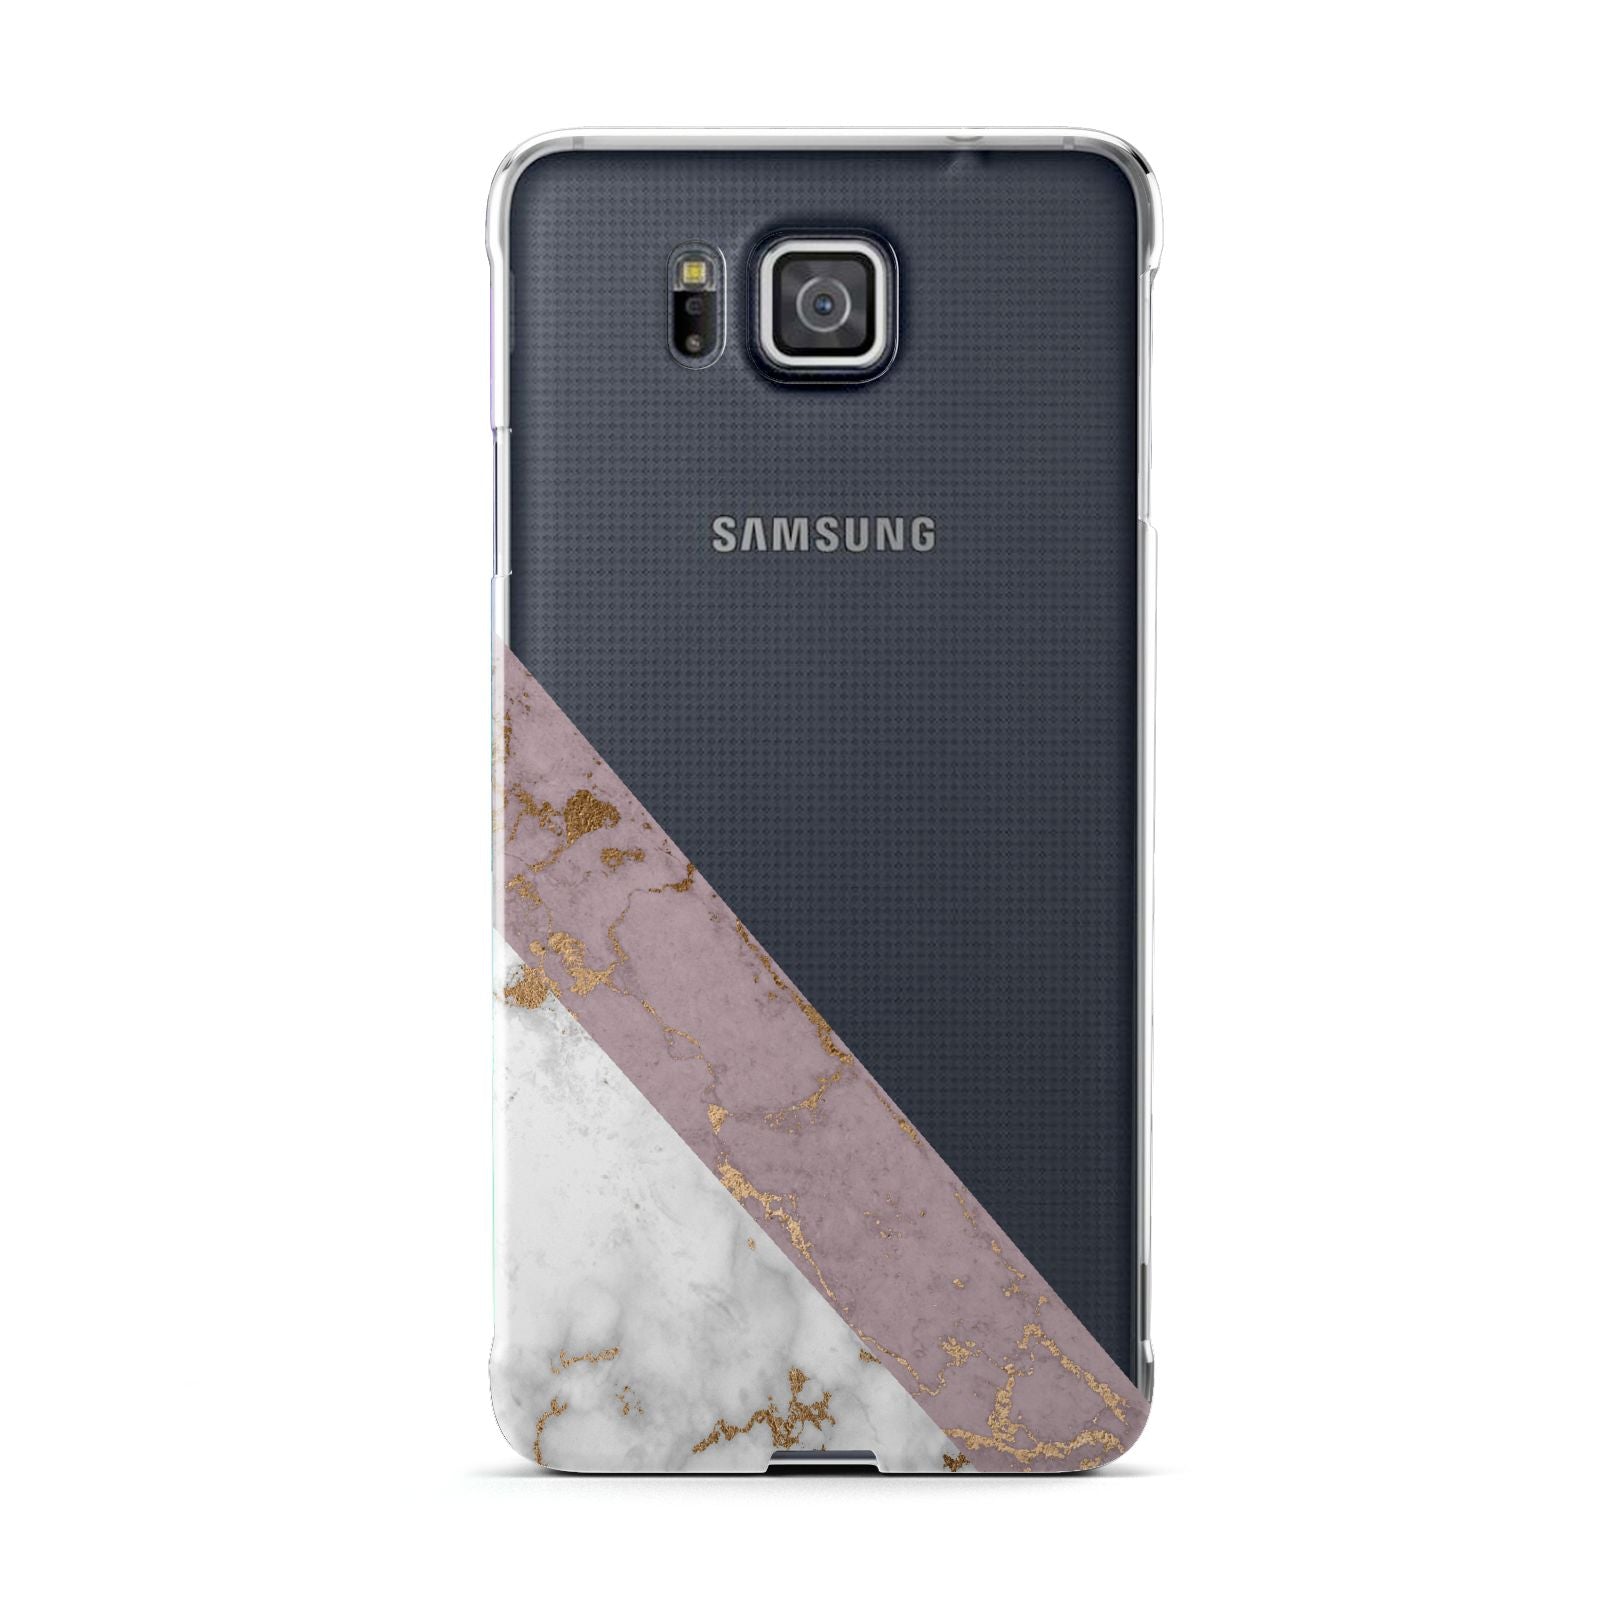 Transparent Pink and White Marble Samsung Galaxy Alpha Case